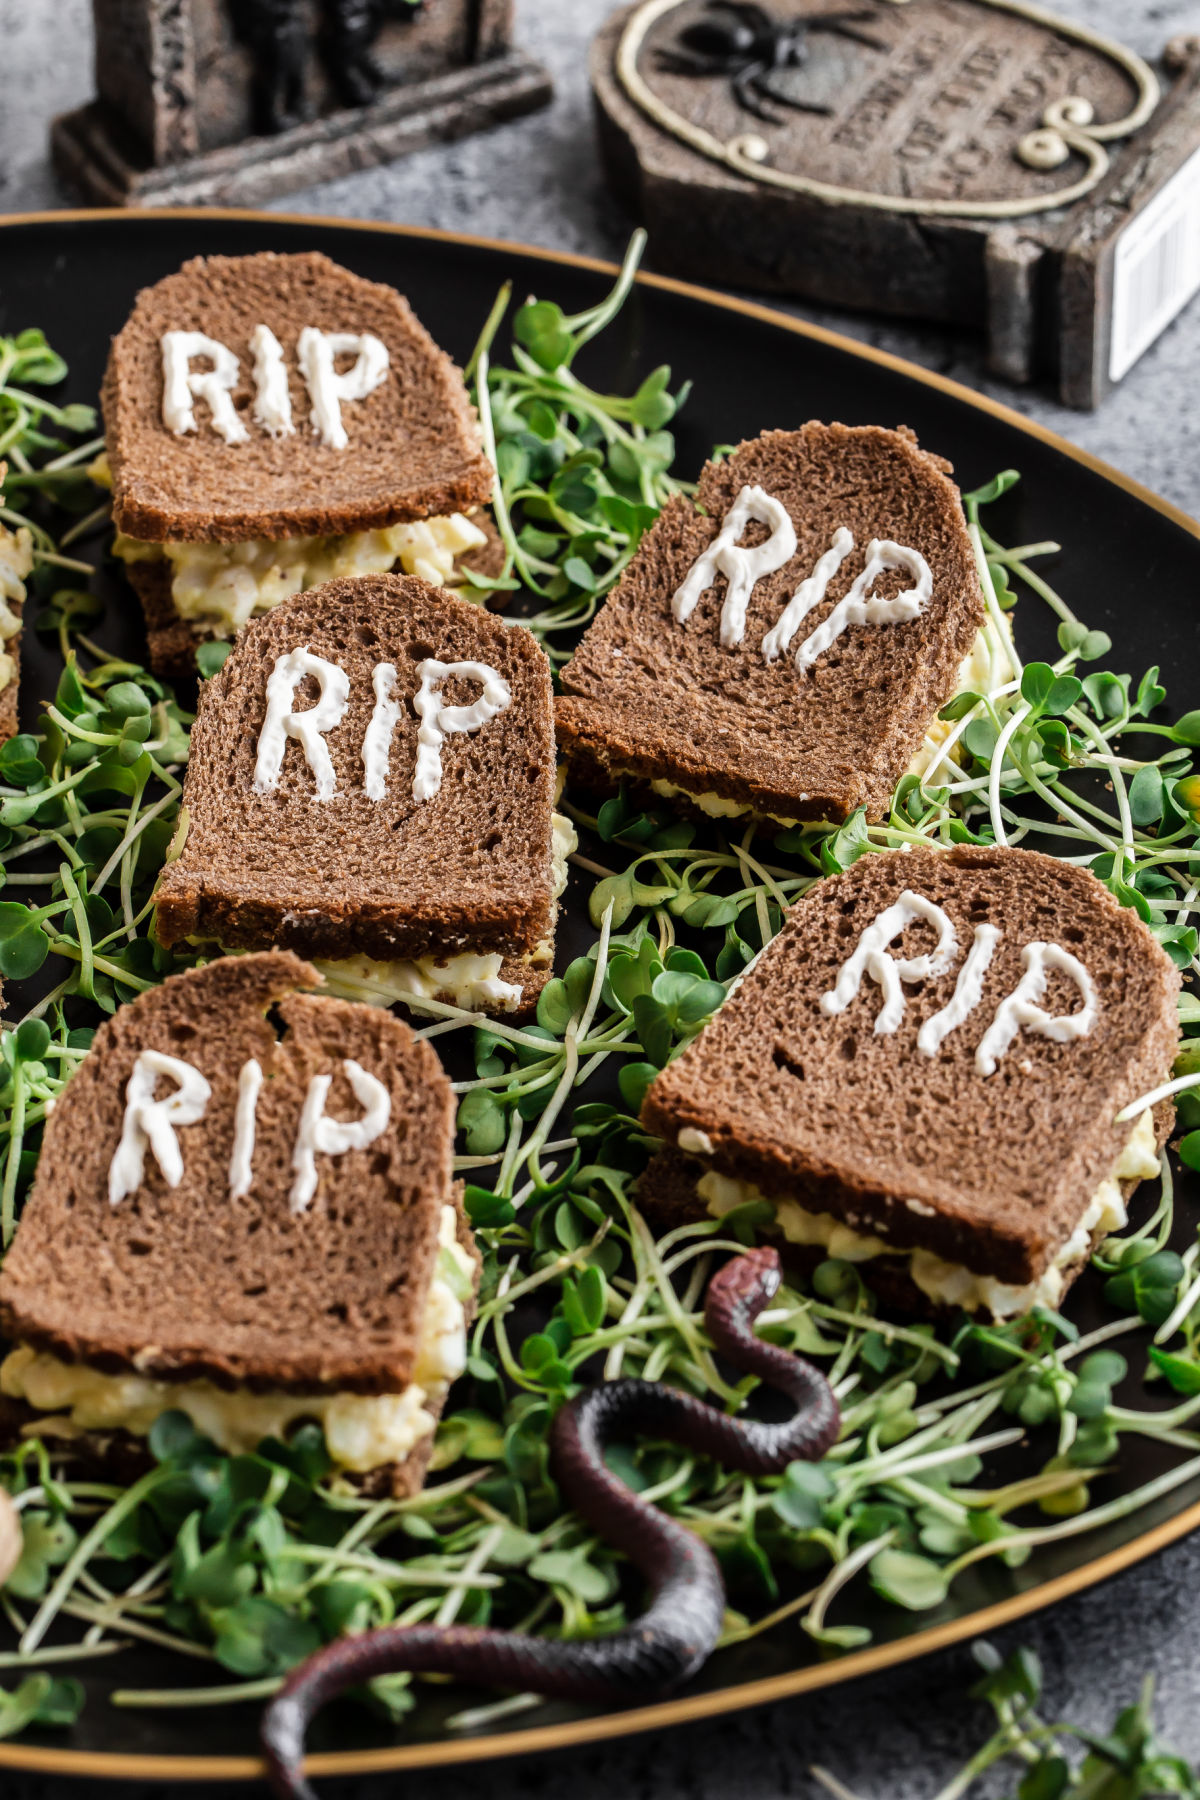 small sandwiches cut to look like Halloween tombstones, laying on a bed of microgreens.